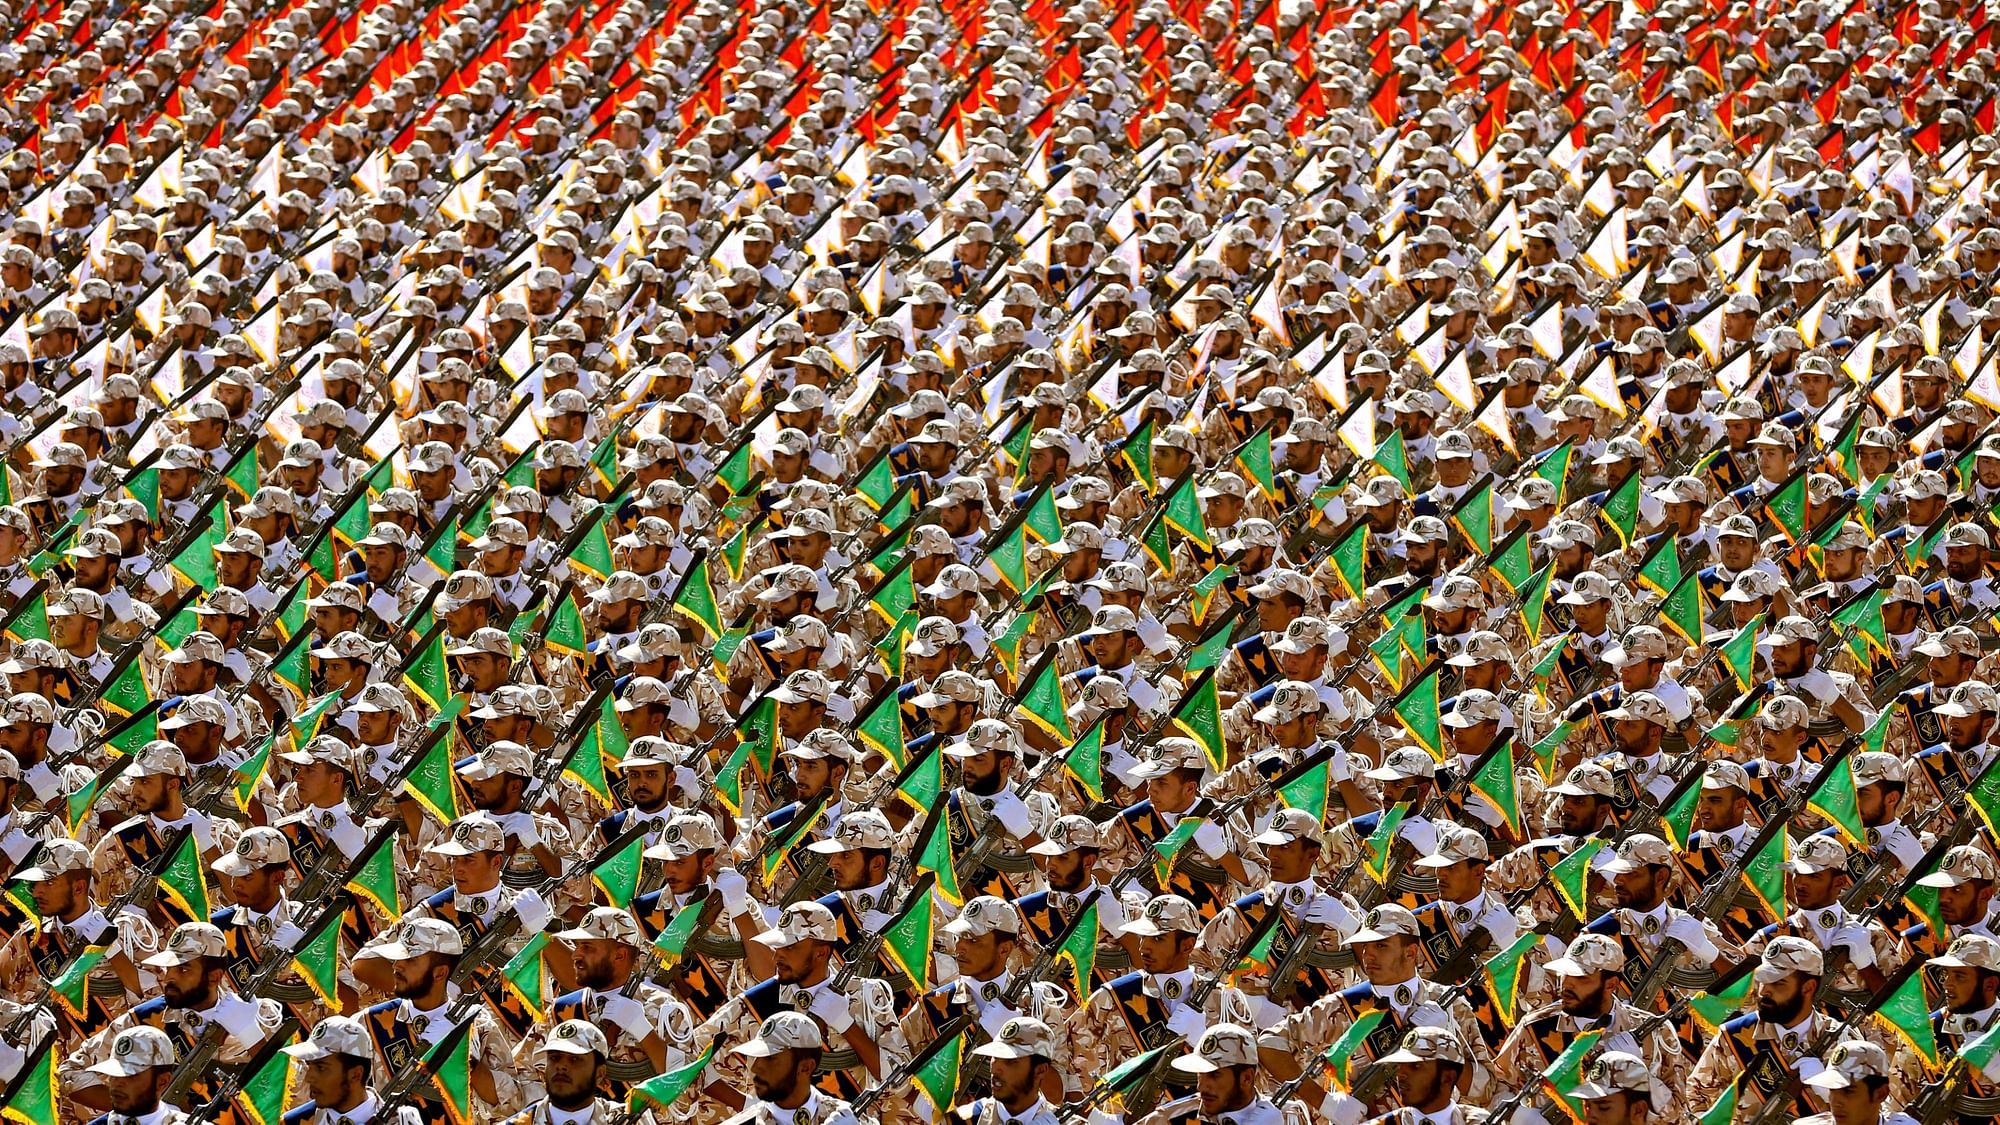 Members of the Iran’s Revolutionary Guard march during an annual military parade at the mausoleum of Ayatollah Khomeini, outside Tehran, Iran.